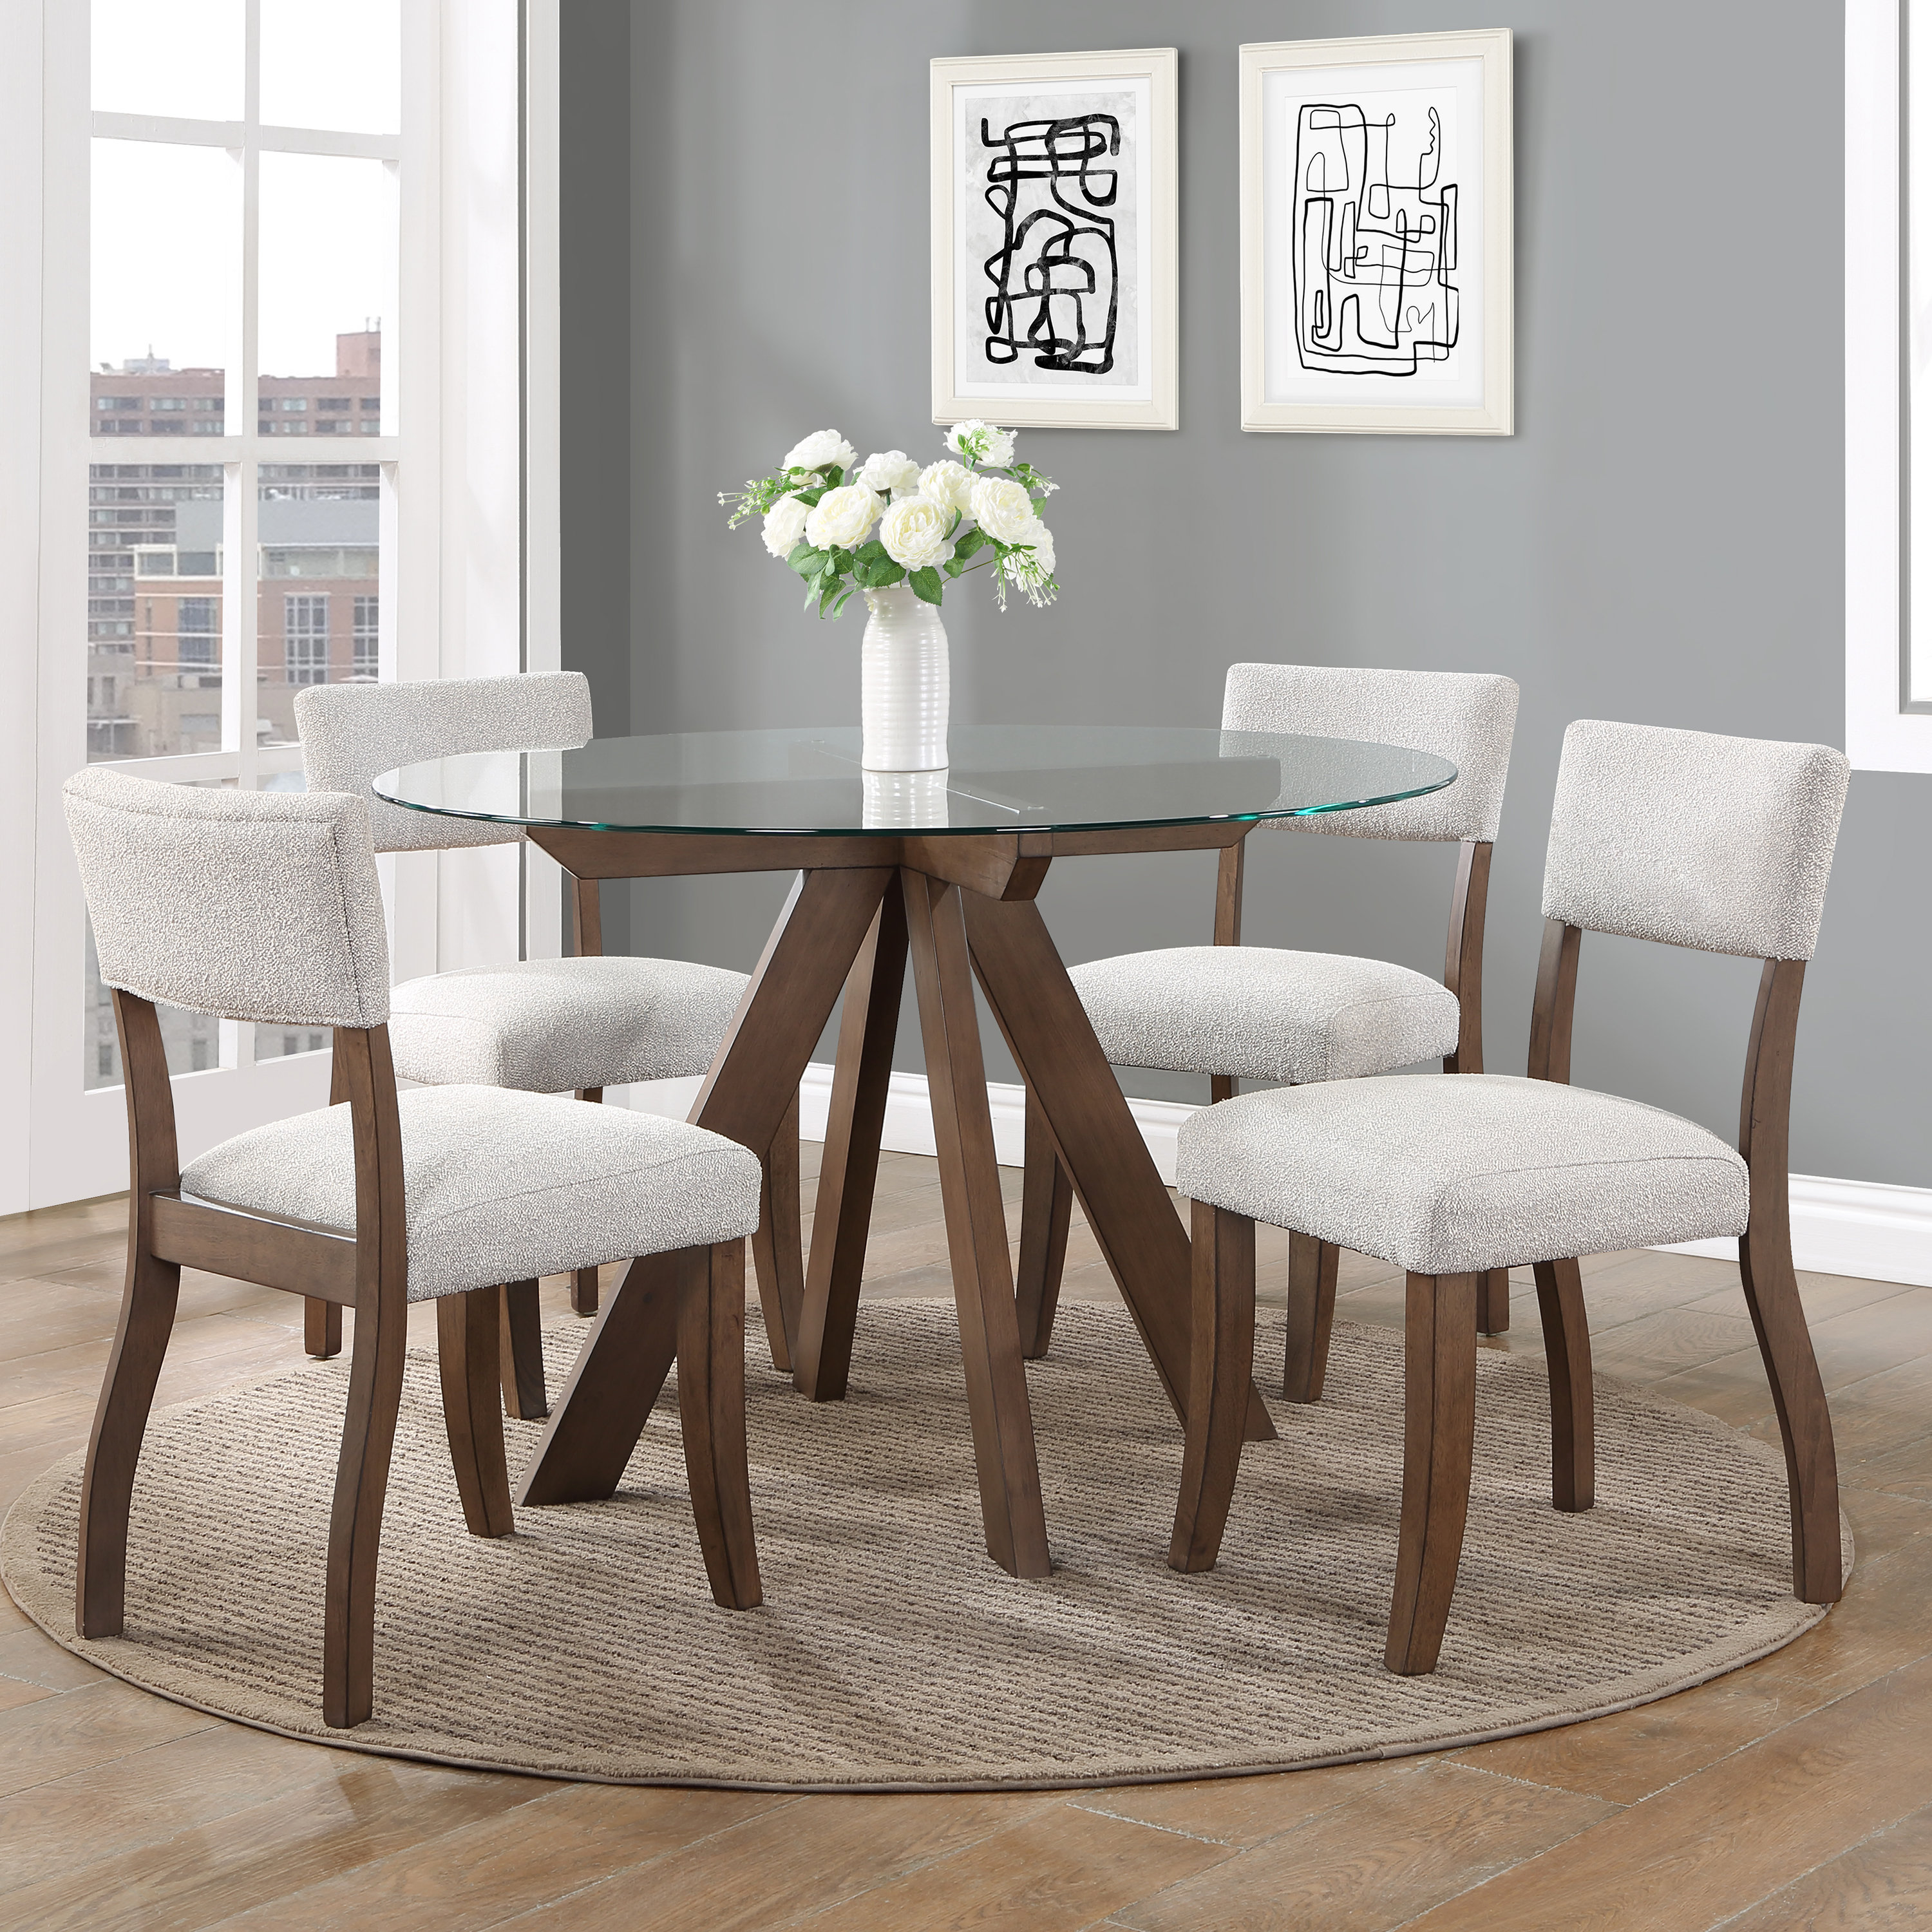 Shop 10 small dining table rooms sets at Wayfair, Lowe's and more